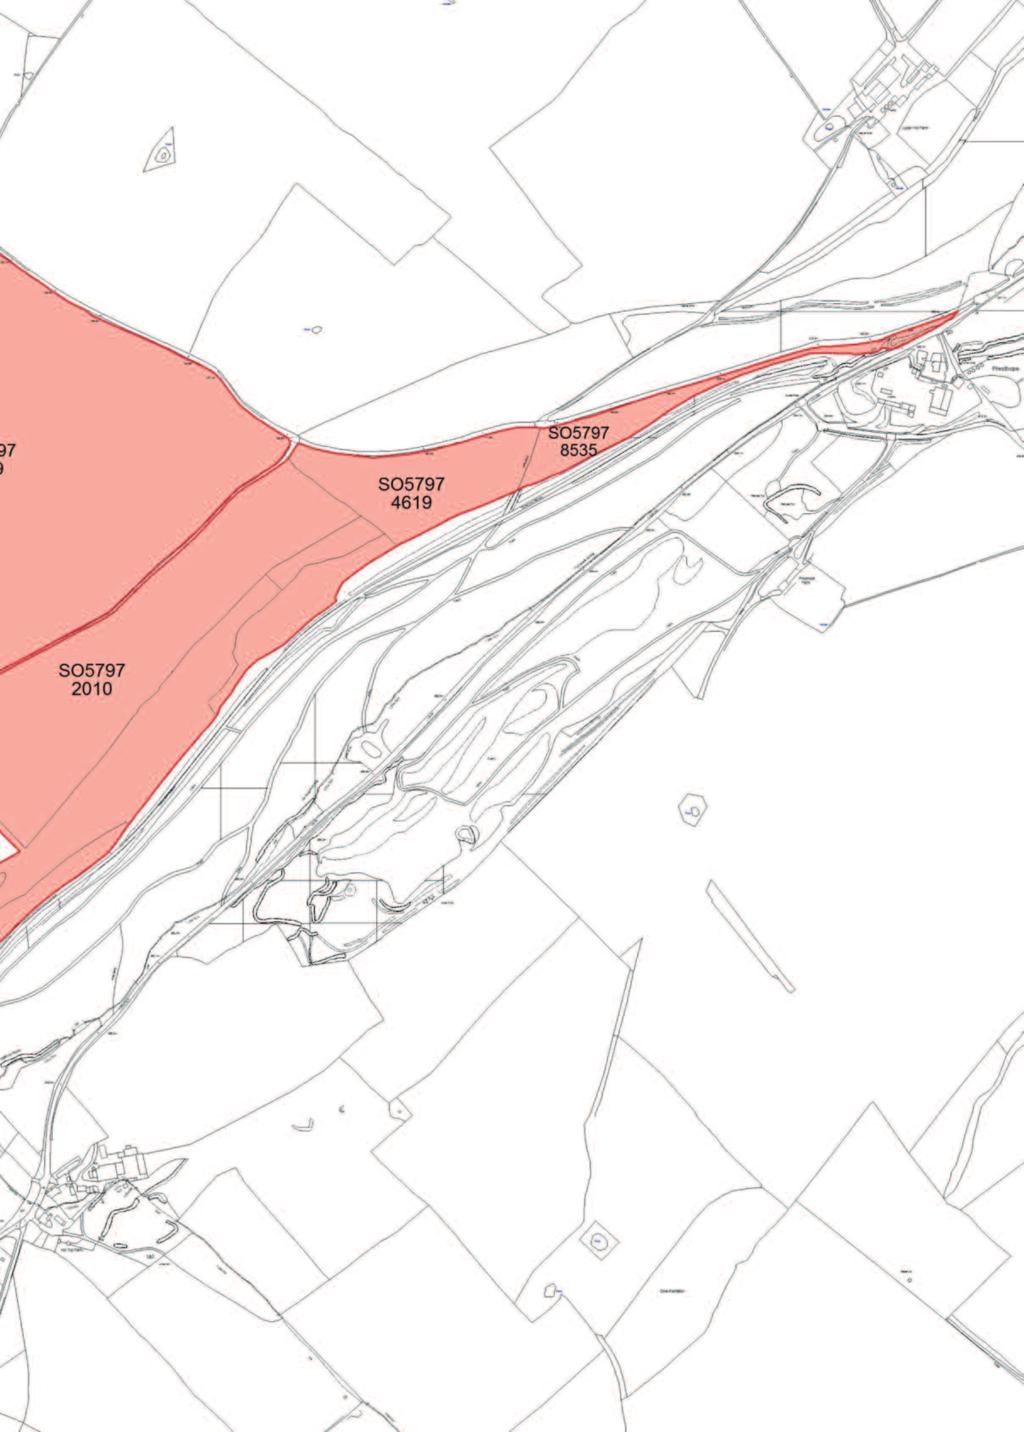 Reproduced from the Ordnance Survey Mapping with the permission of the